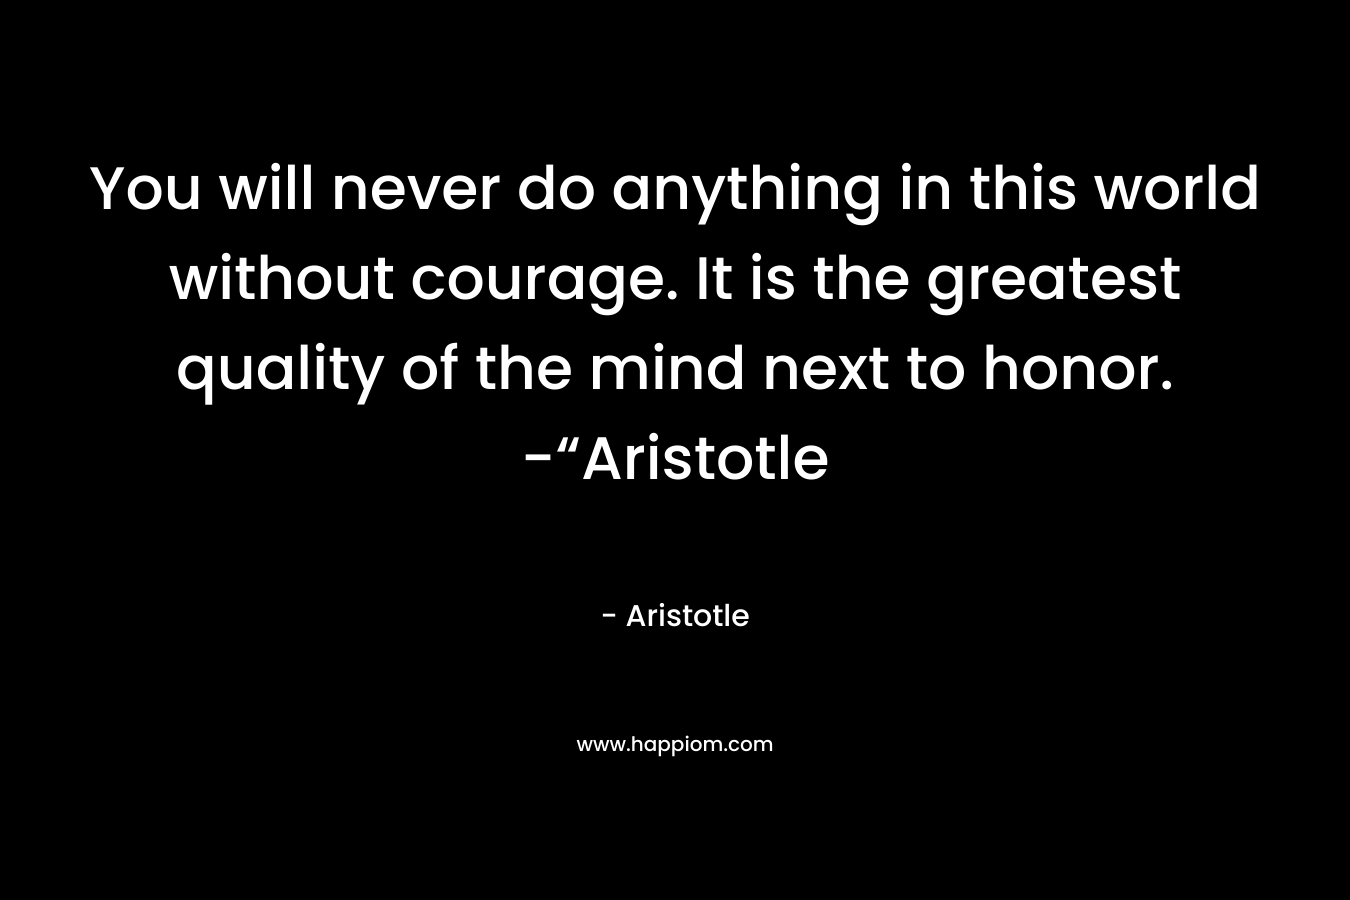 You will never do anything in this world without courage. It is the greatest quality of the mind next to honor. -“Aristotle